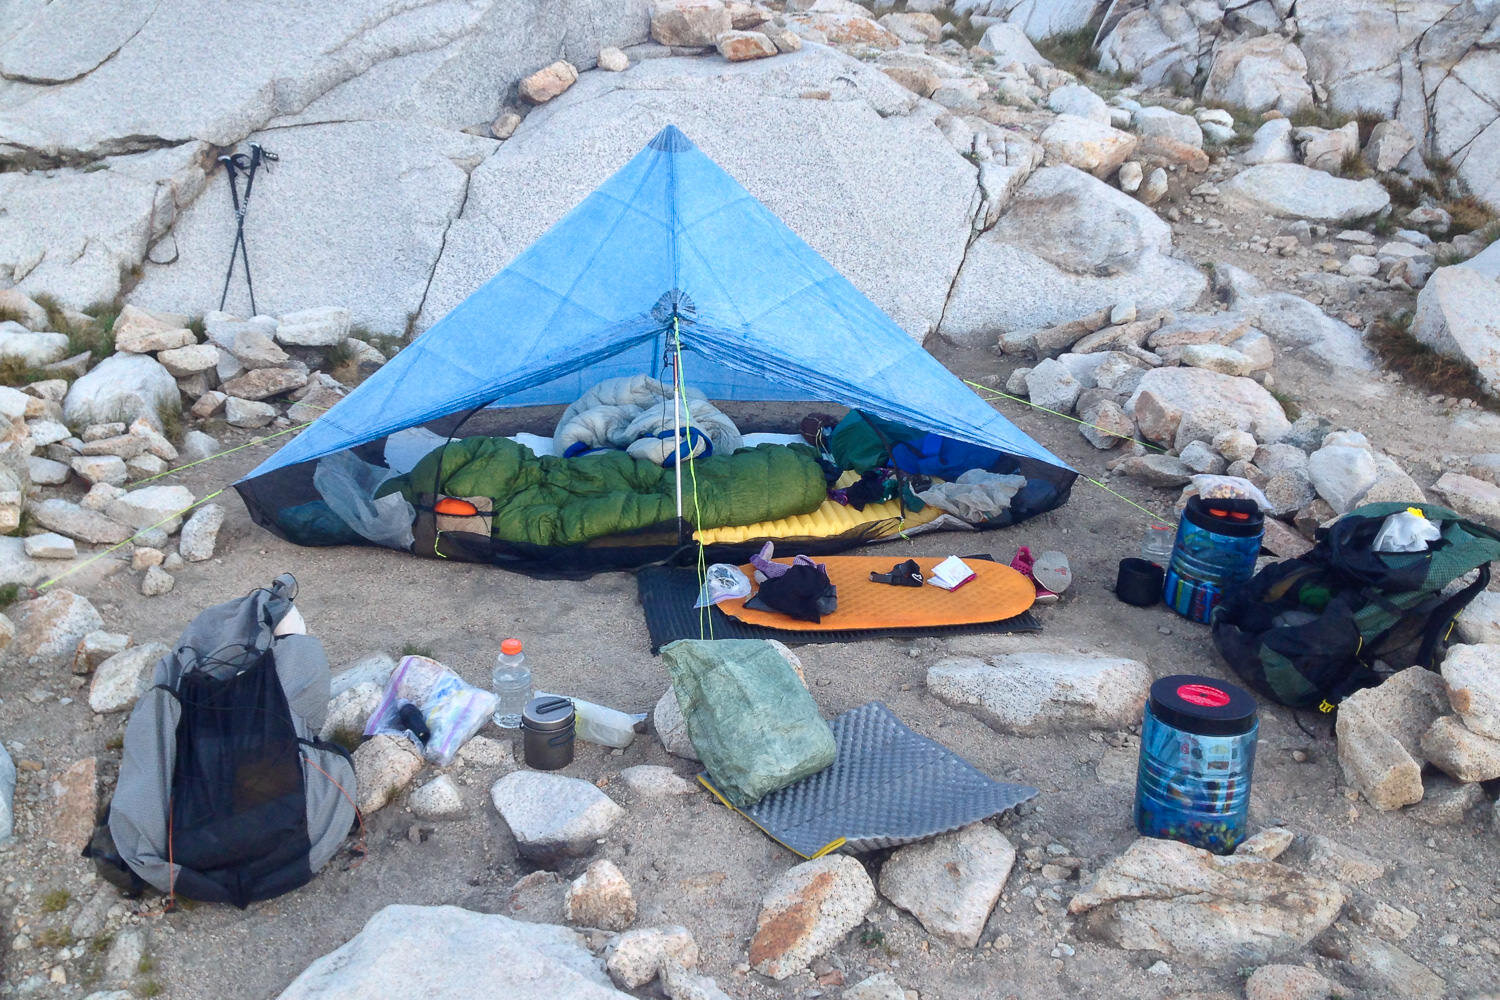 A Thru-hikers camp including: Zpacks Hexamid solo-plus (the older version of the Plexamid Tent), Therm-A-Rest Z-Seat & XLite Sleeping Pad, BearVault BV500 Bear Canisters, ULA Catalyst Backpack, ETC.